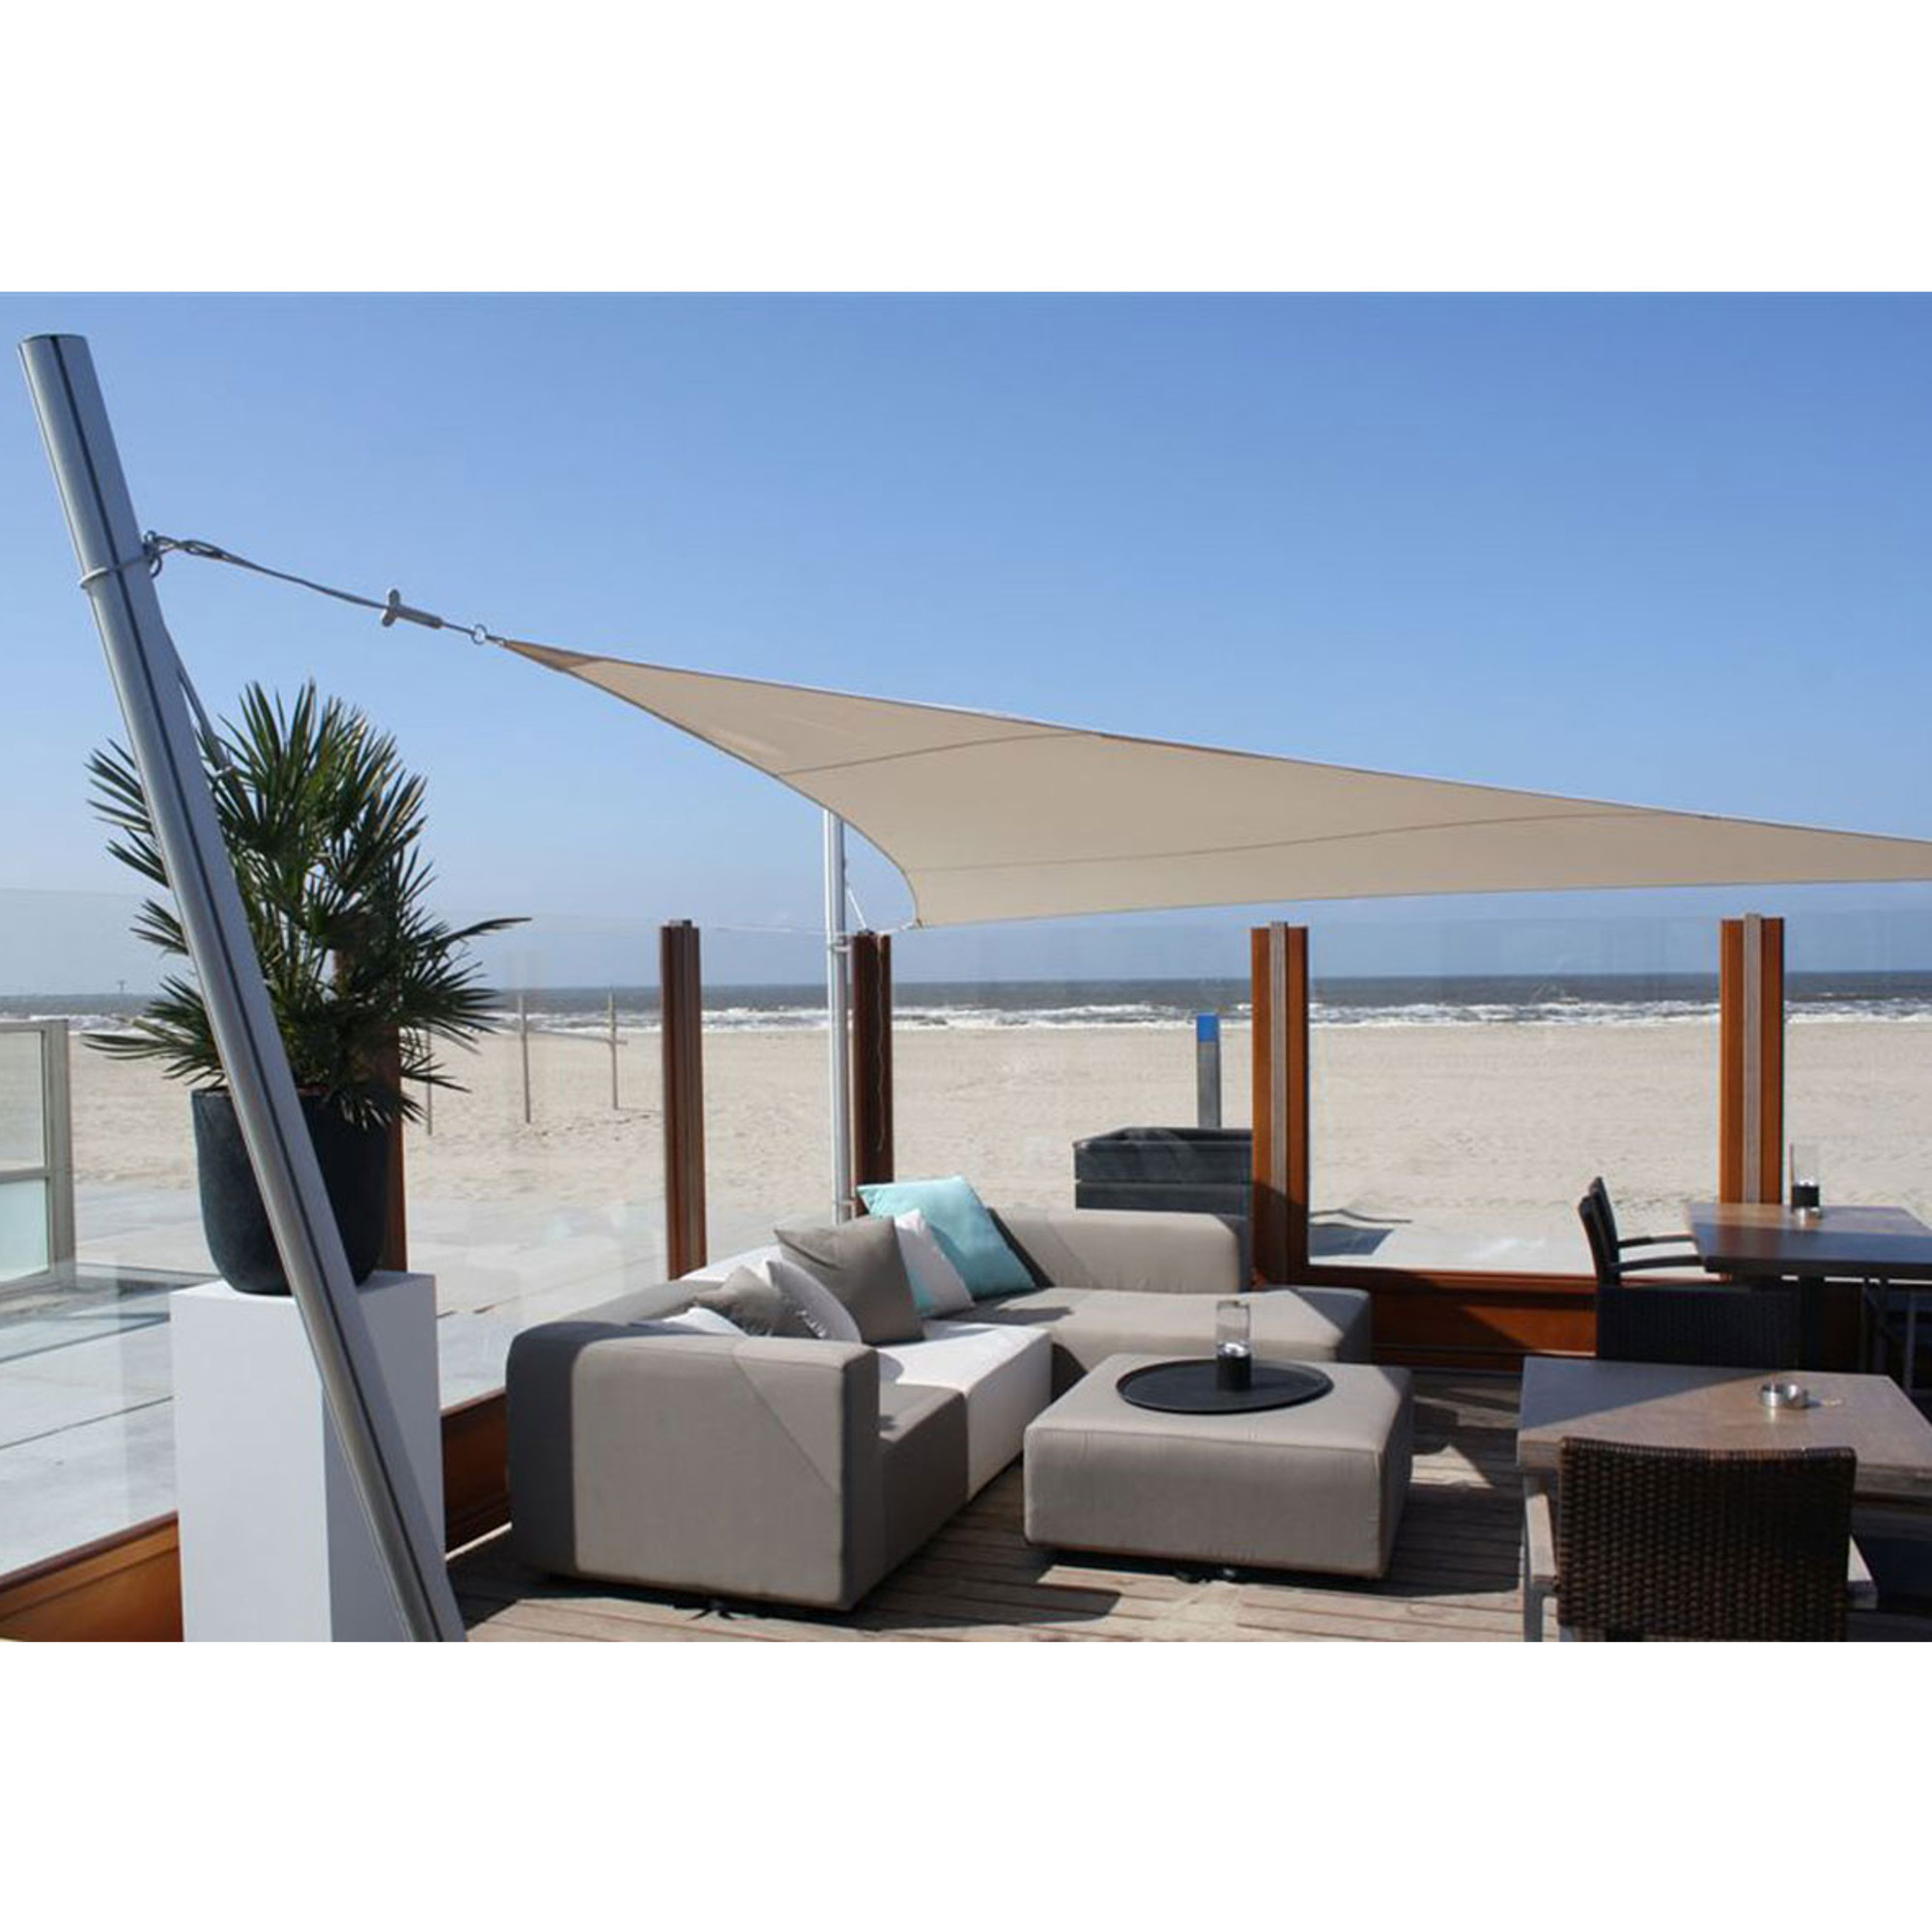 INGENUA, Canvas Sunshades, Parasols and Canopy Systems